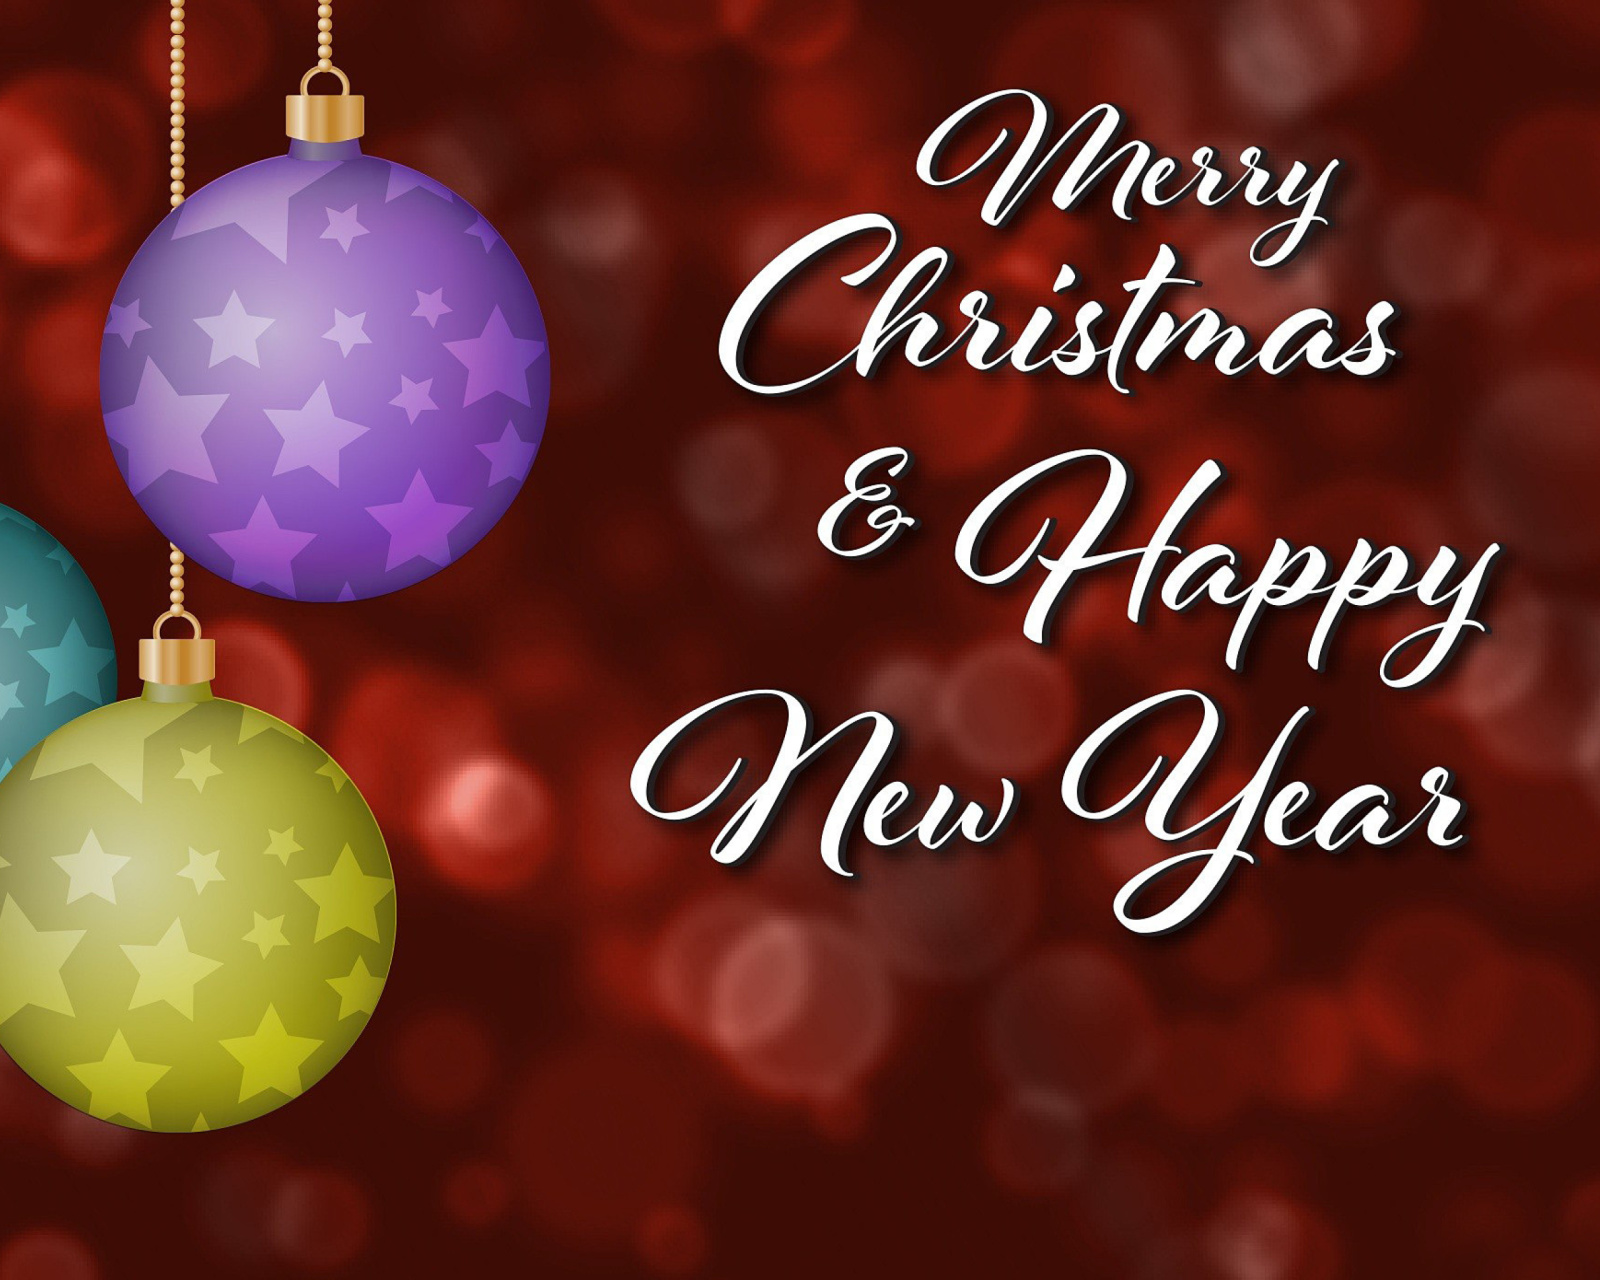 Обои Merry Christmas and Best Wishes for a Happy New Year 1600x1280